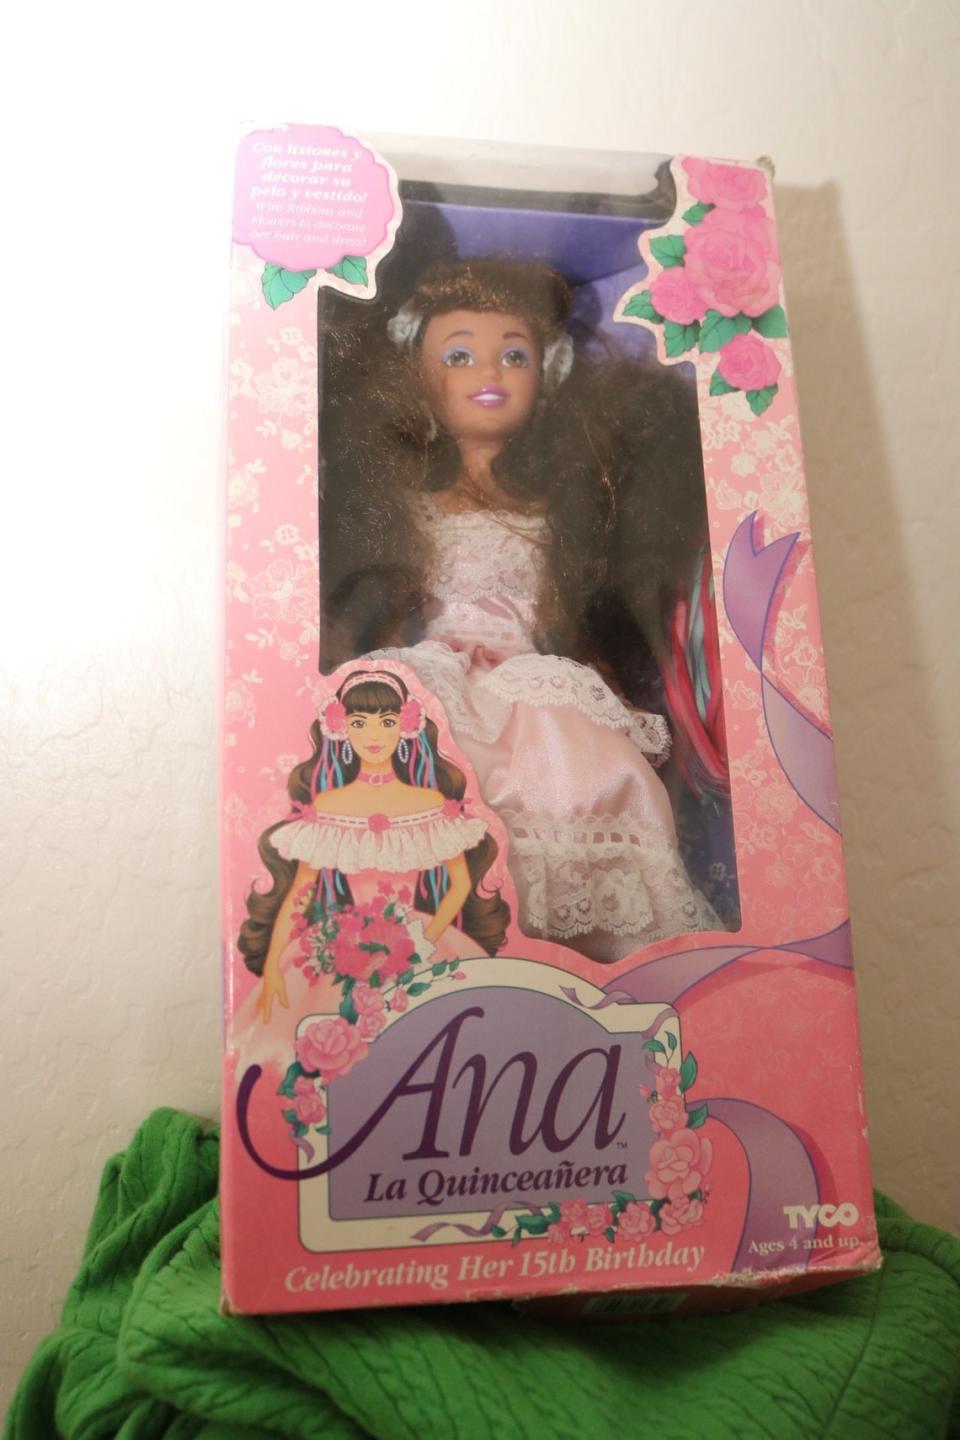 An Ana La Quinceanera doll in her box